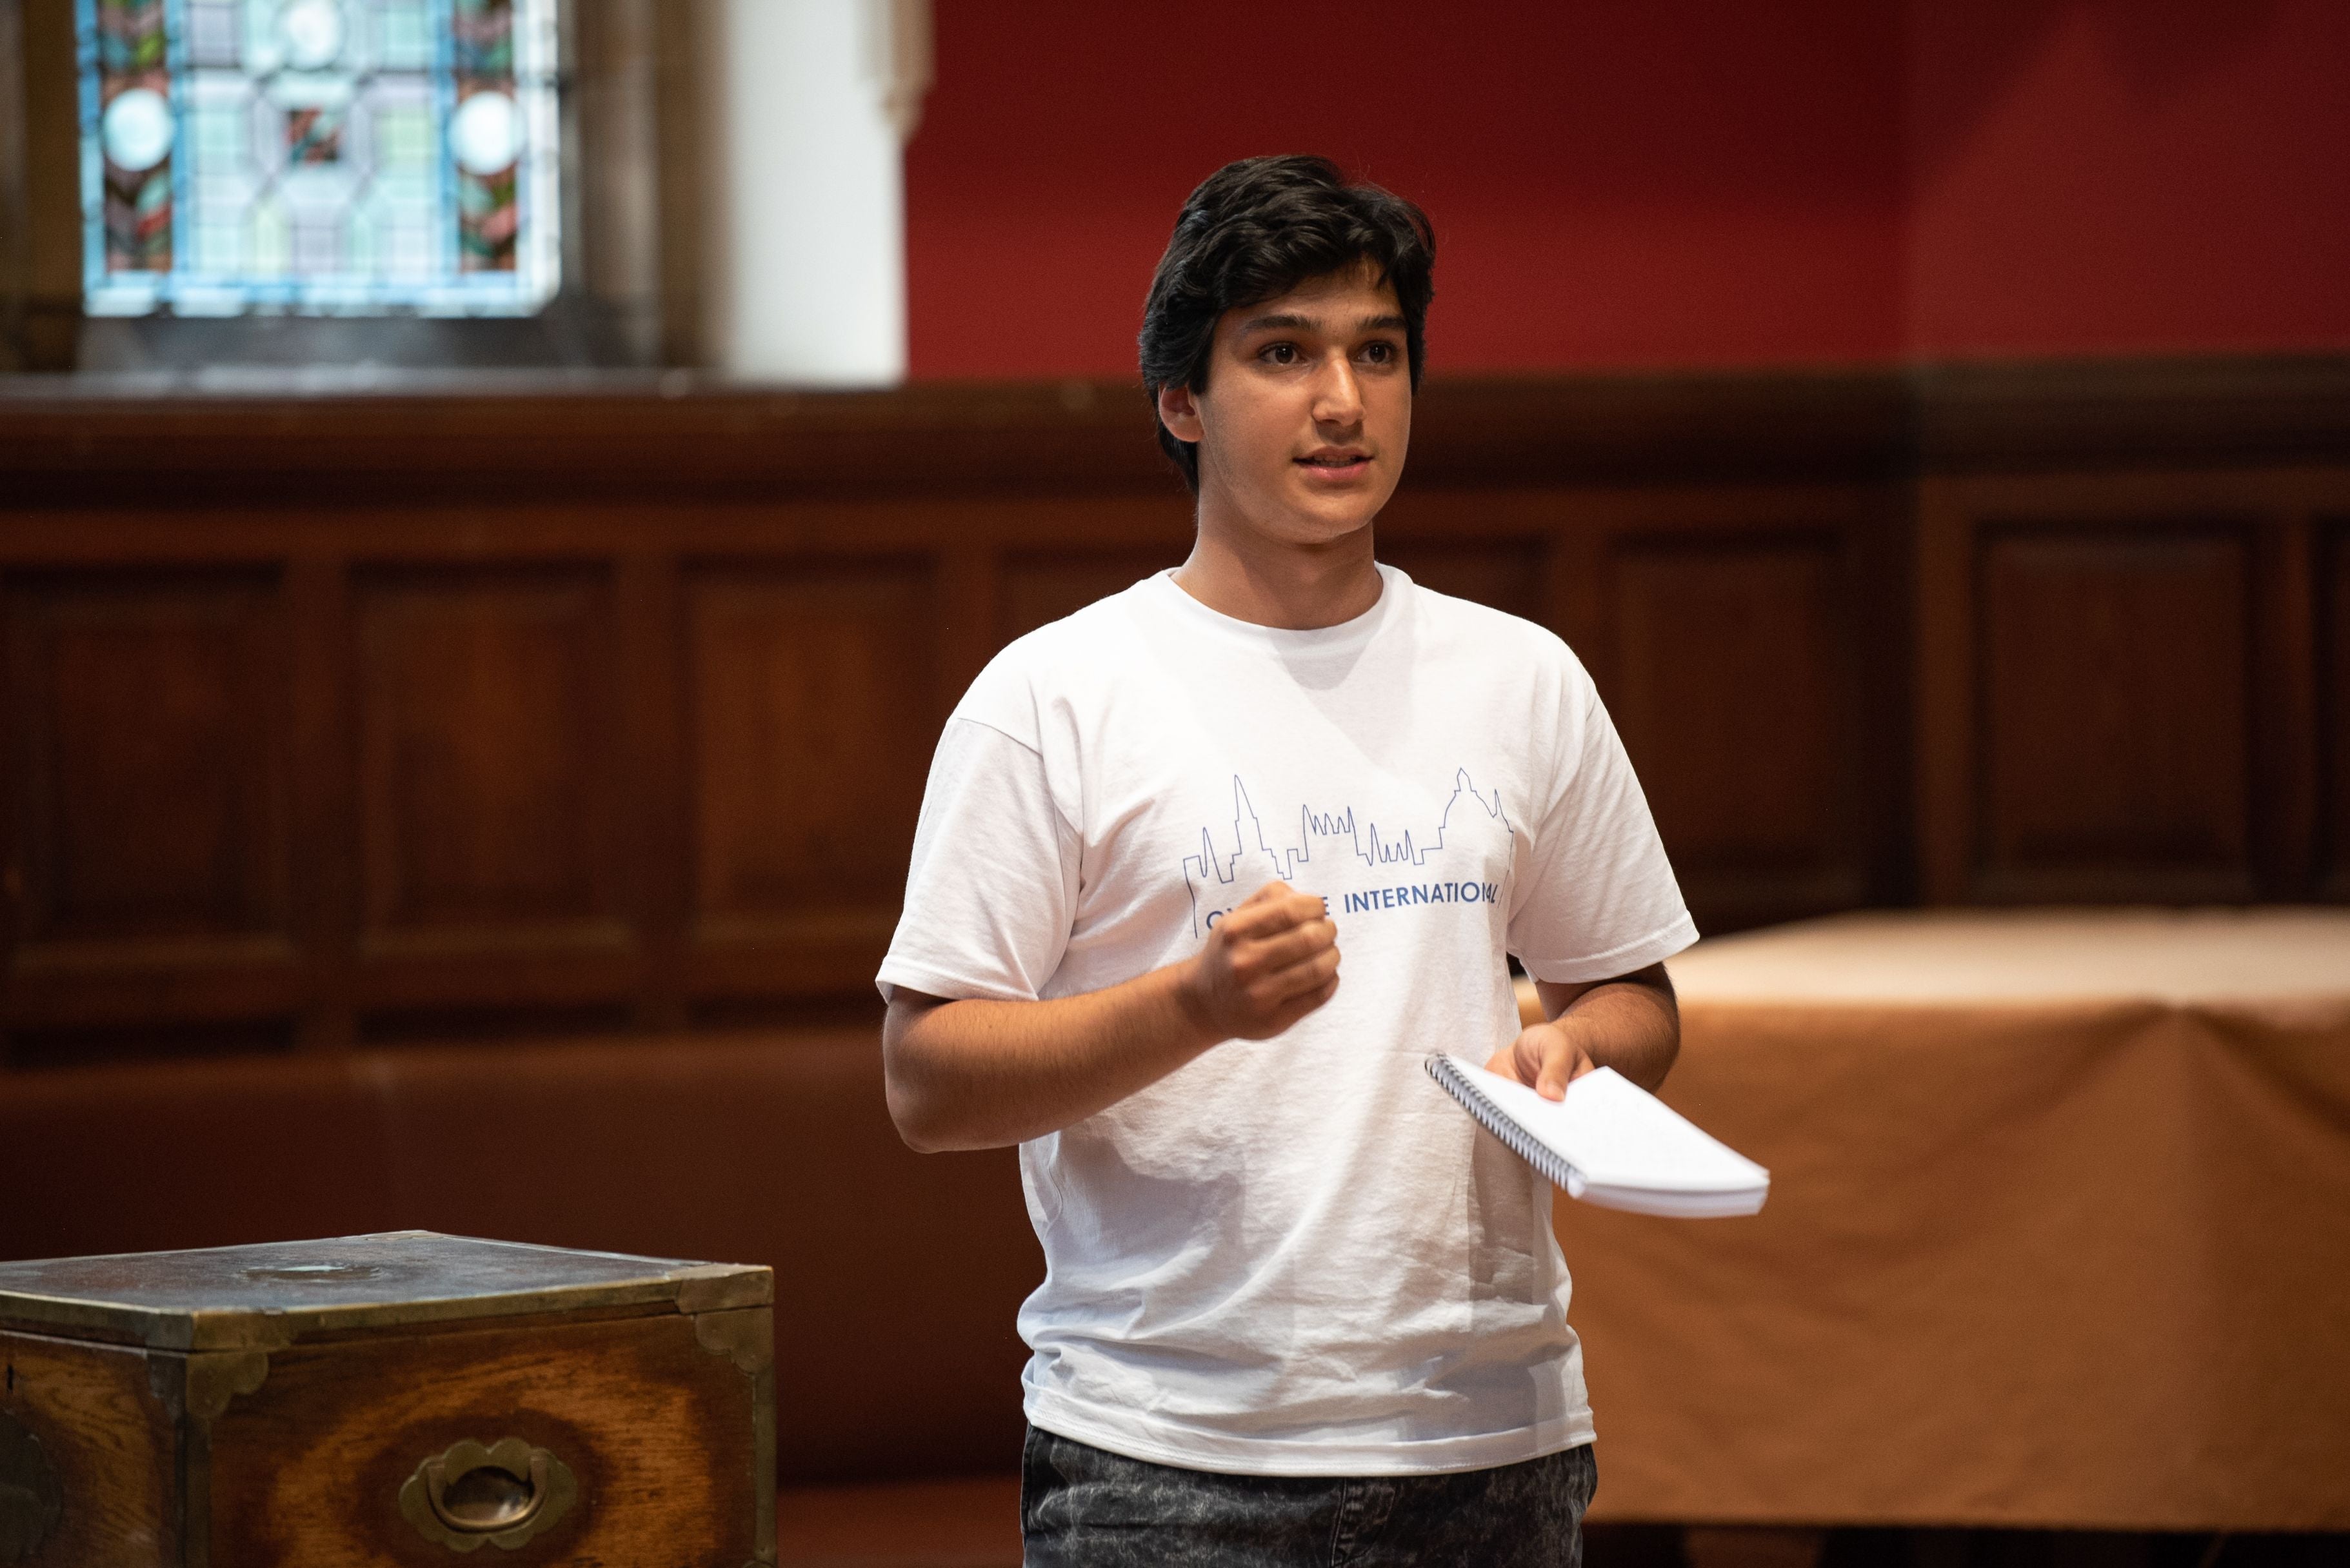 A summer school student debating at the Oxford Union